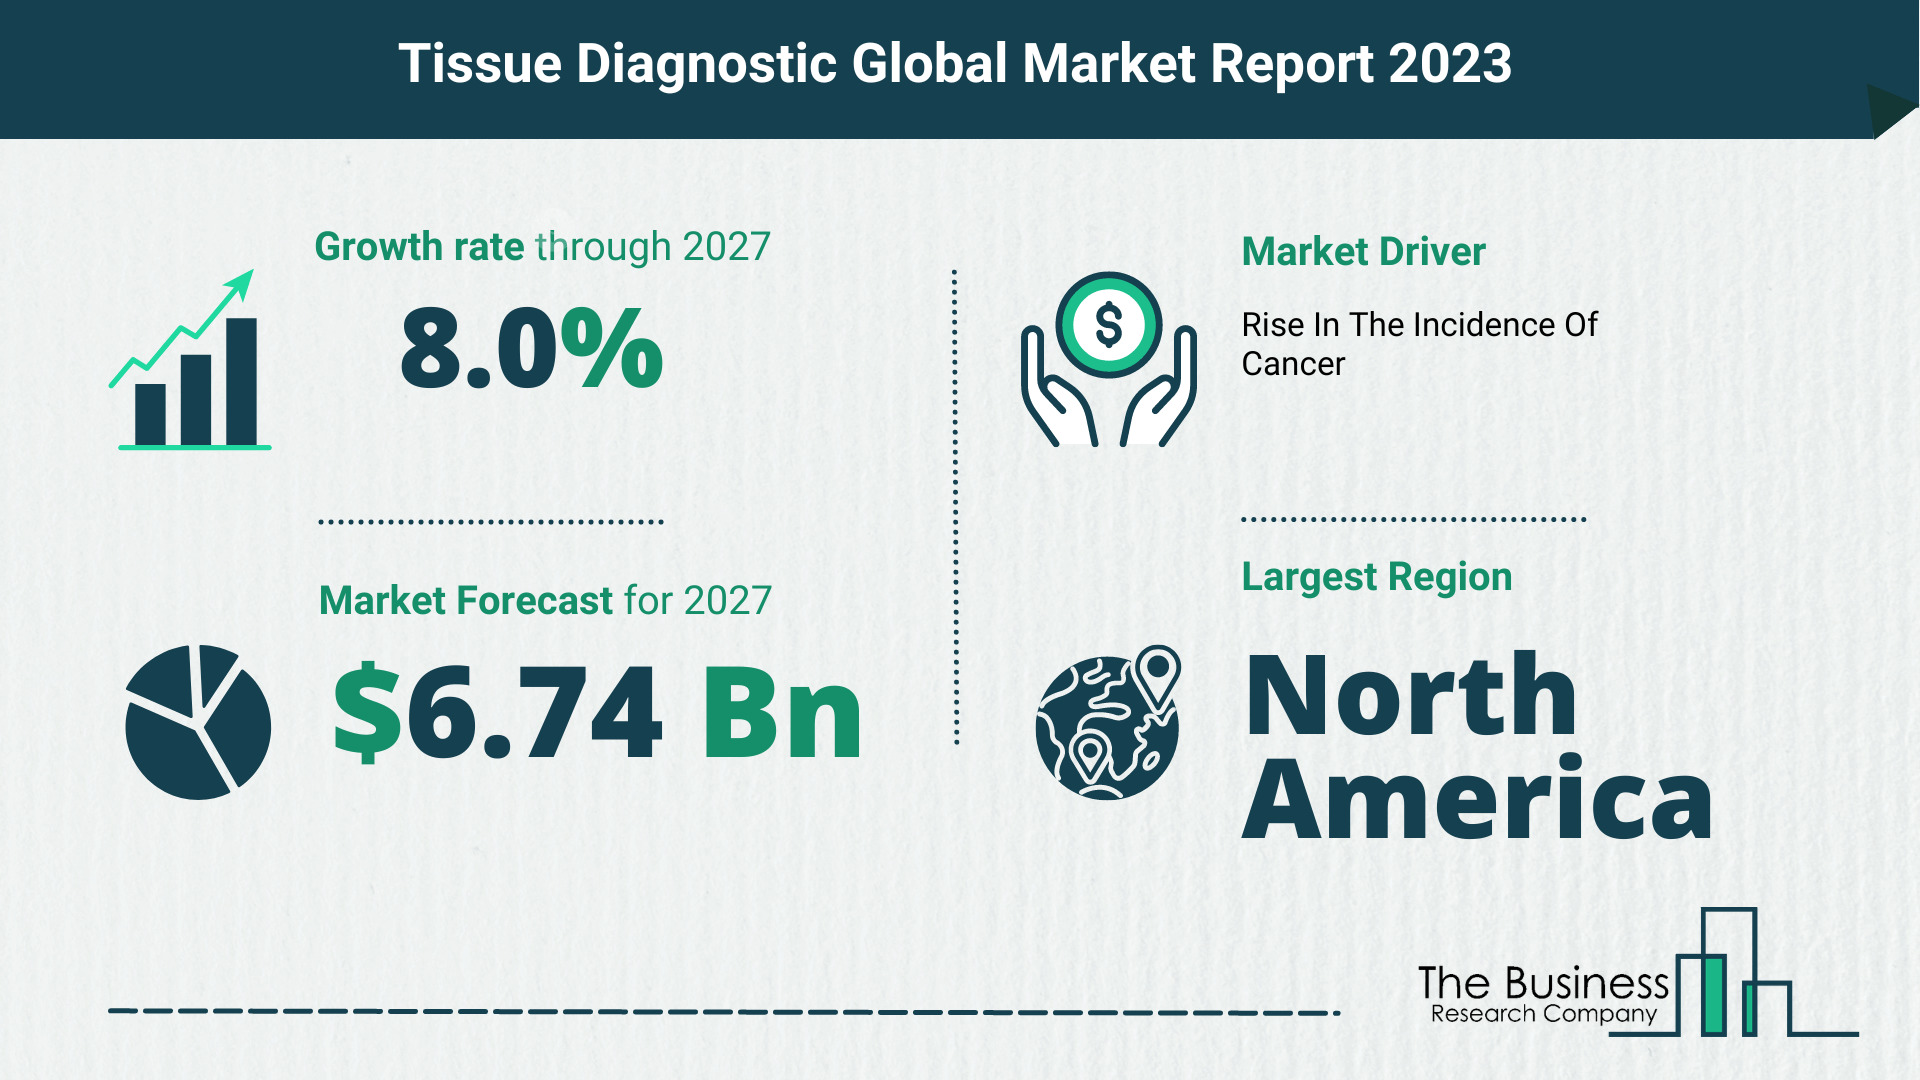 What Will The Tissue Diagnostic Market Look Like In 2023?